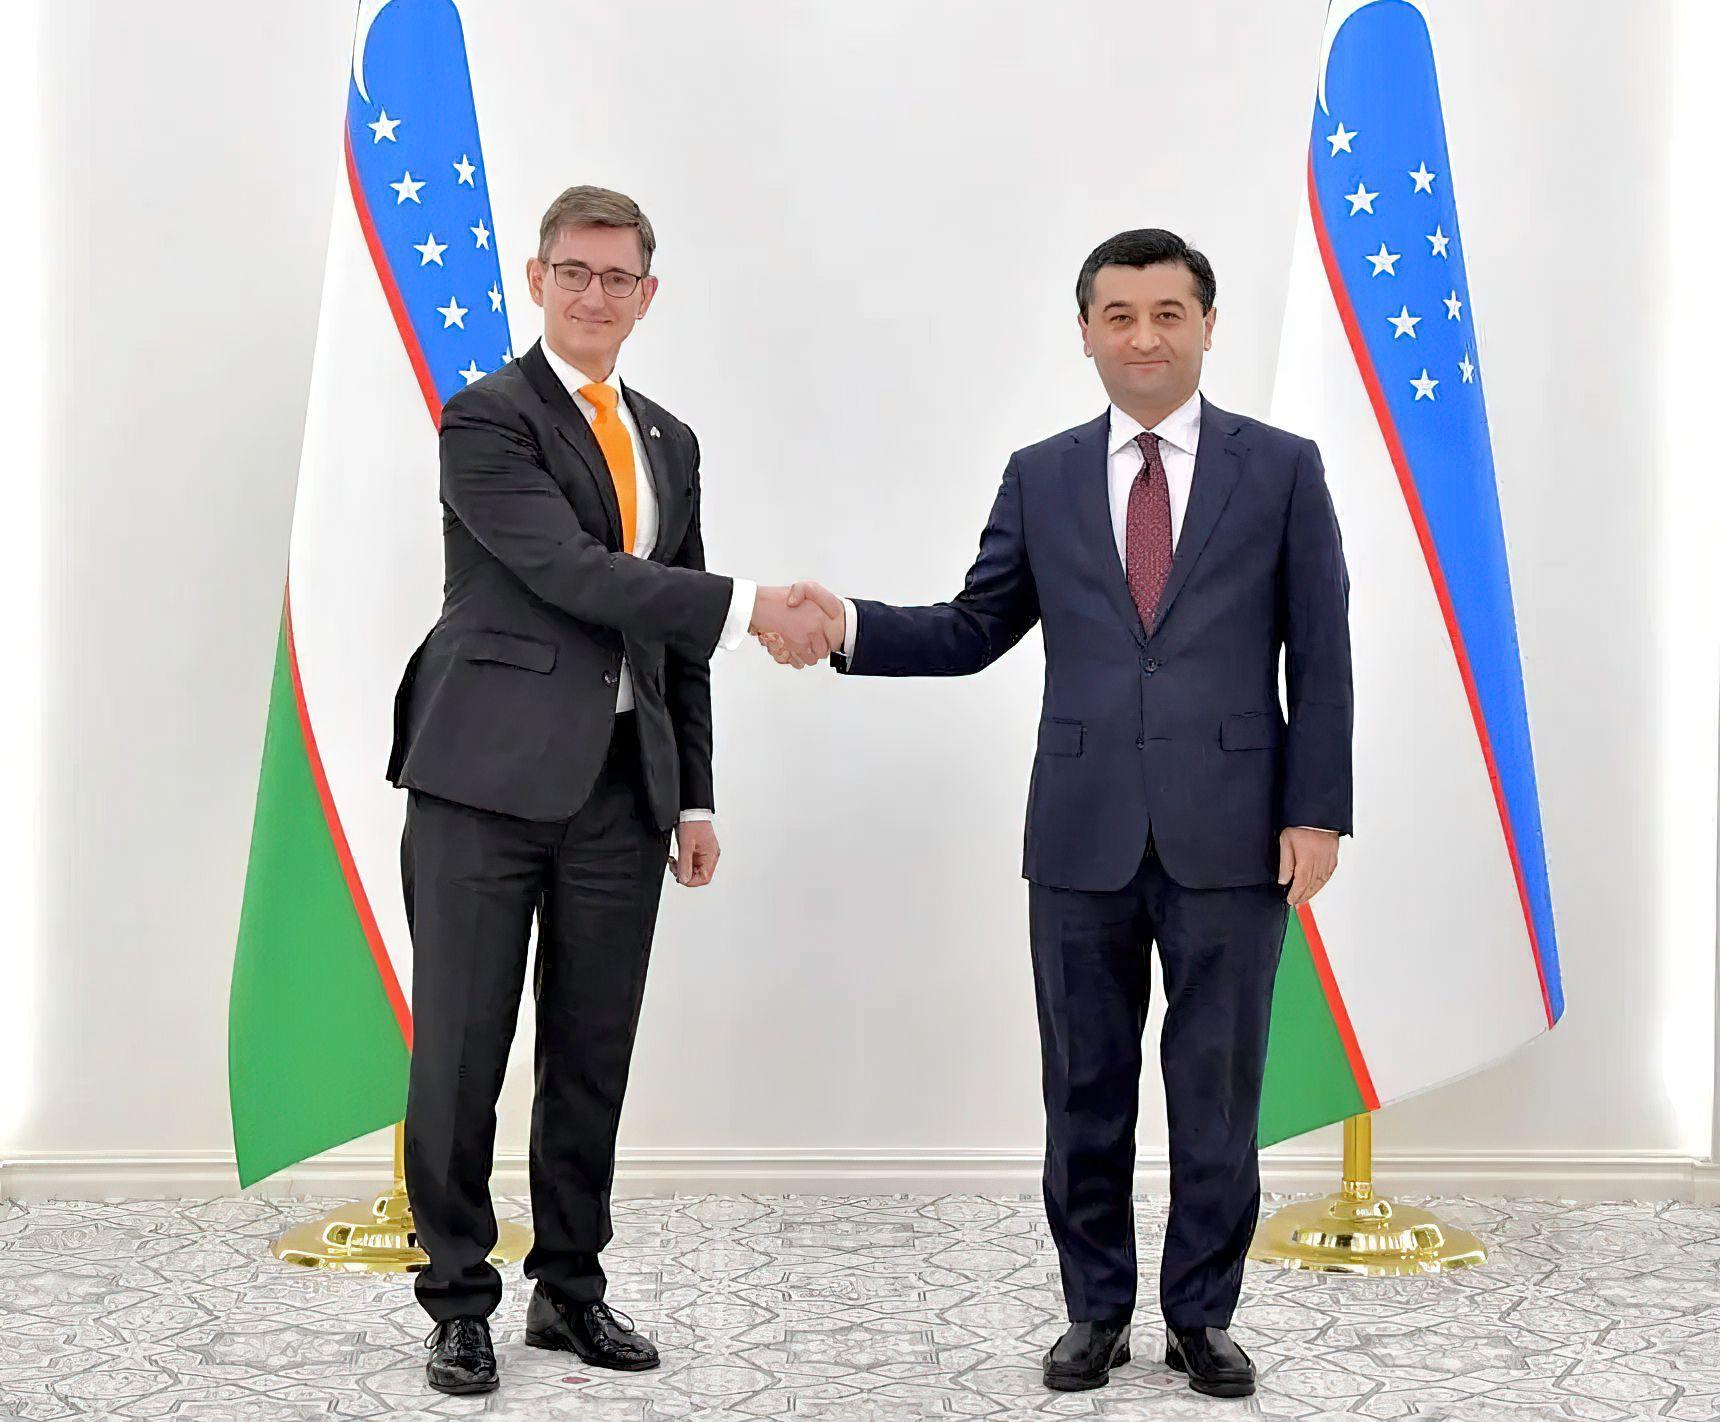 New Ambassador to Uzbekistan appointed by the Netherlands